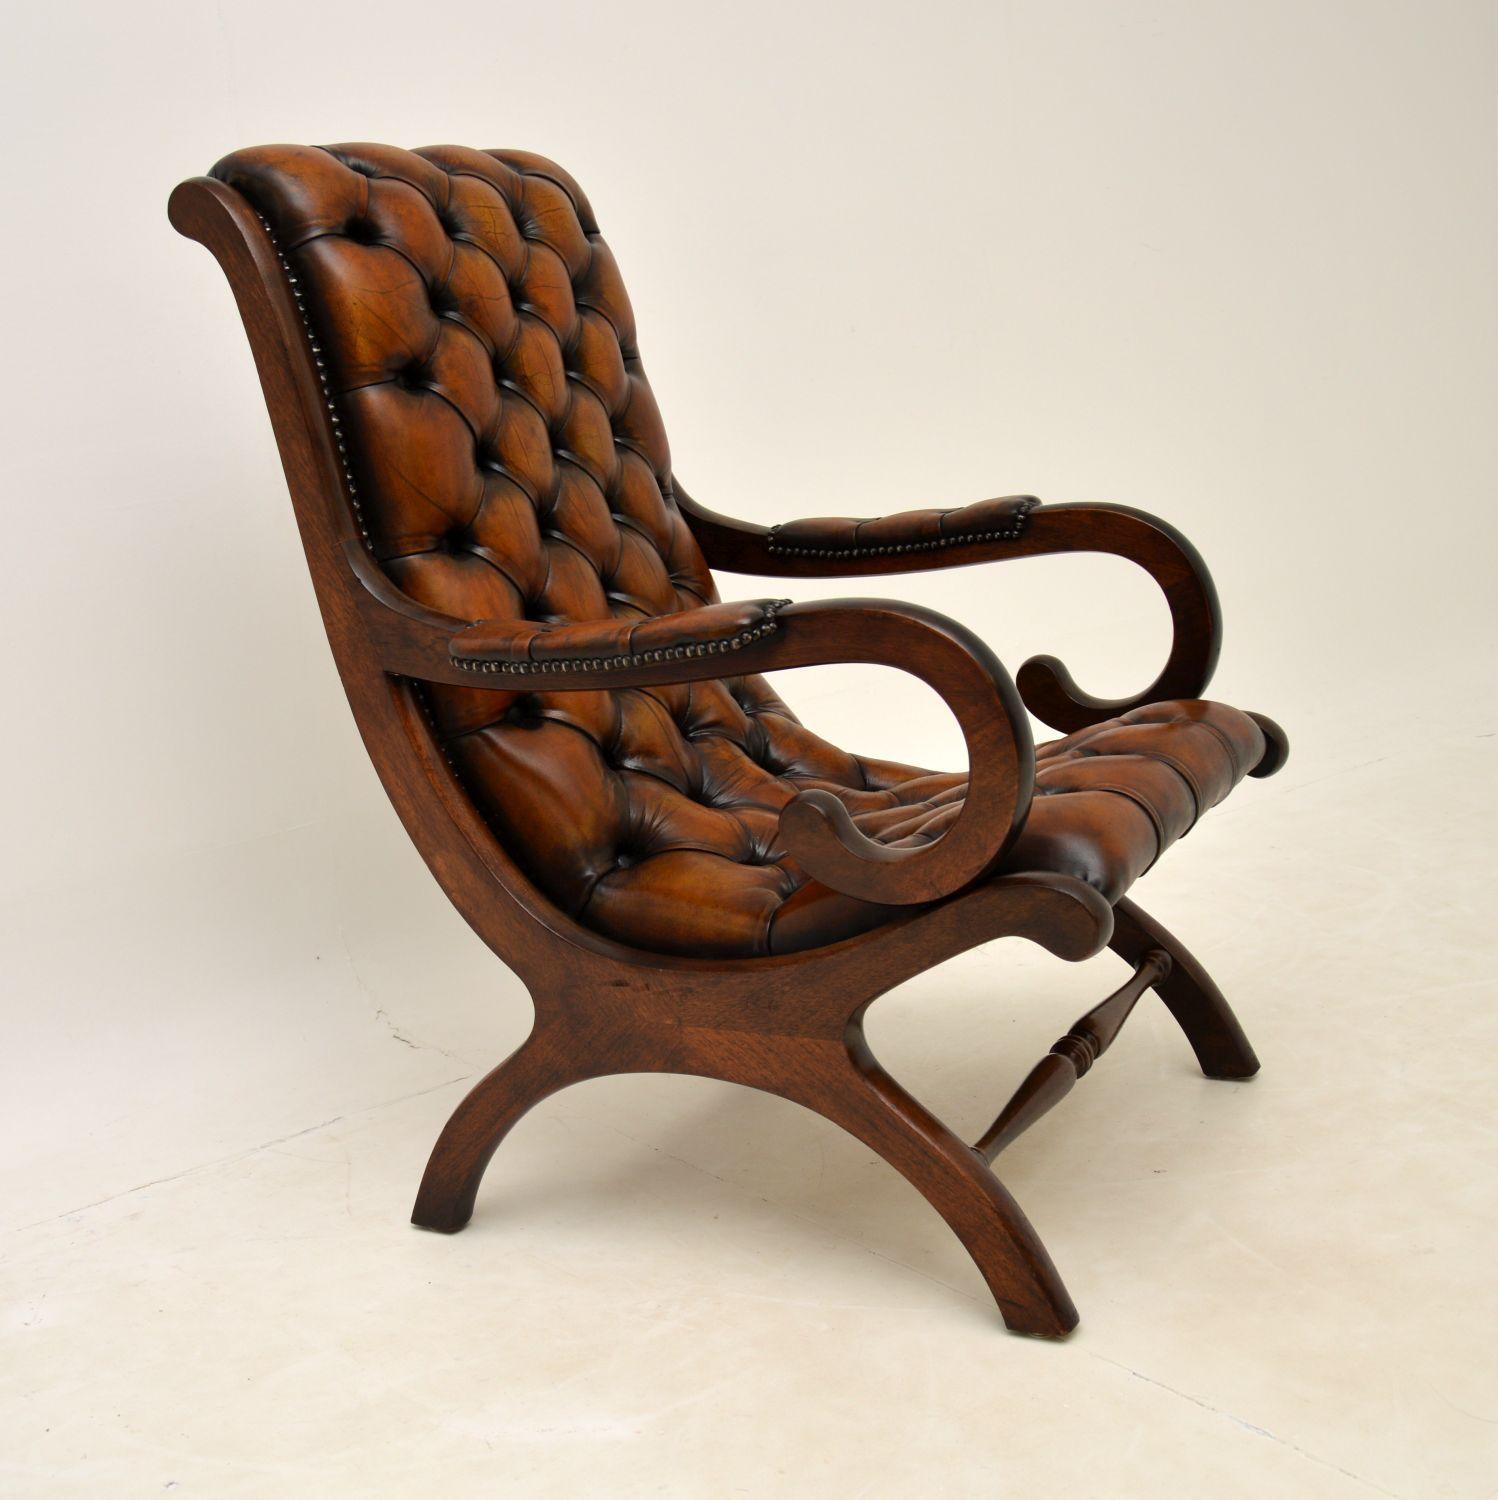 English Antique Regency Style Leather Armchair & Stool